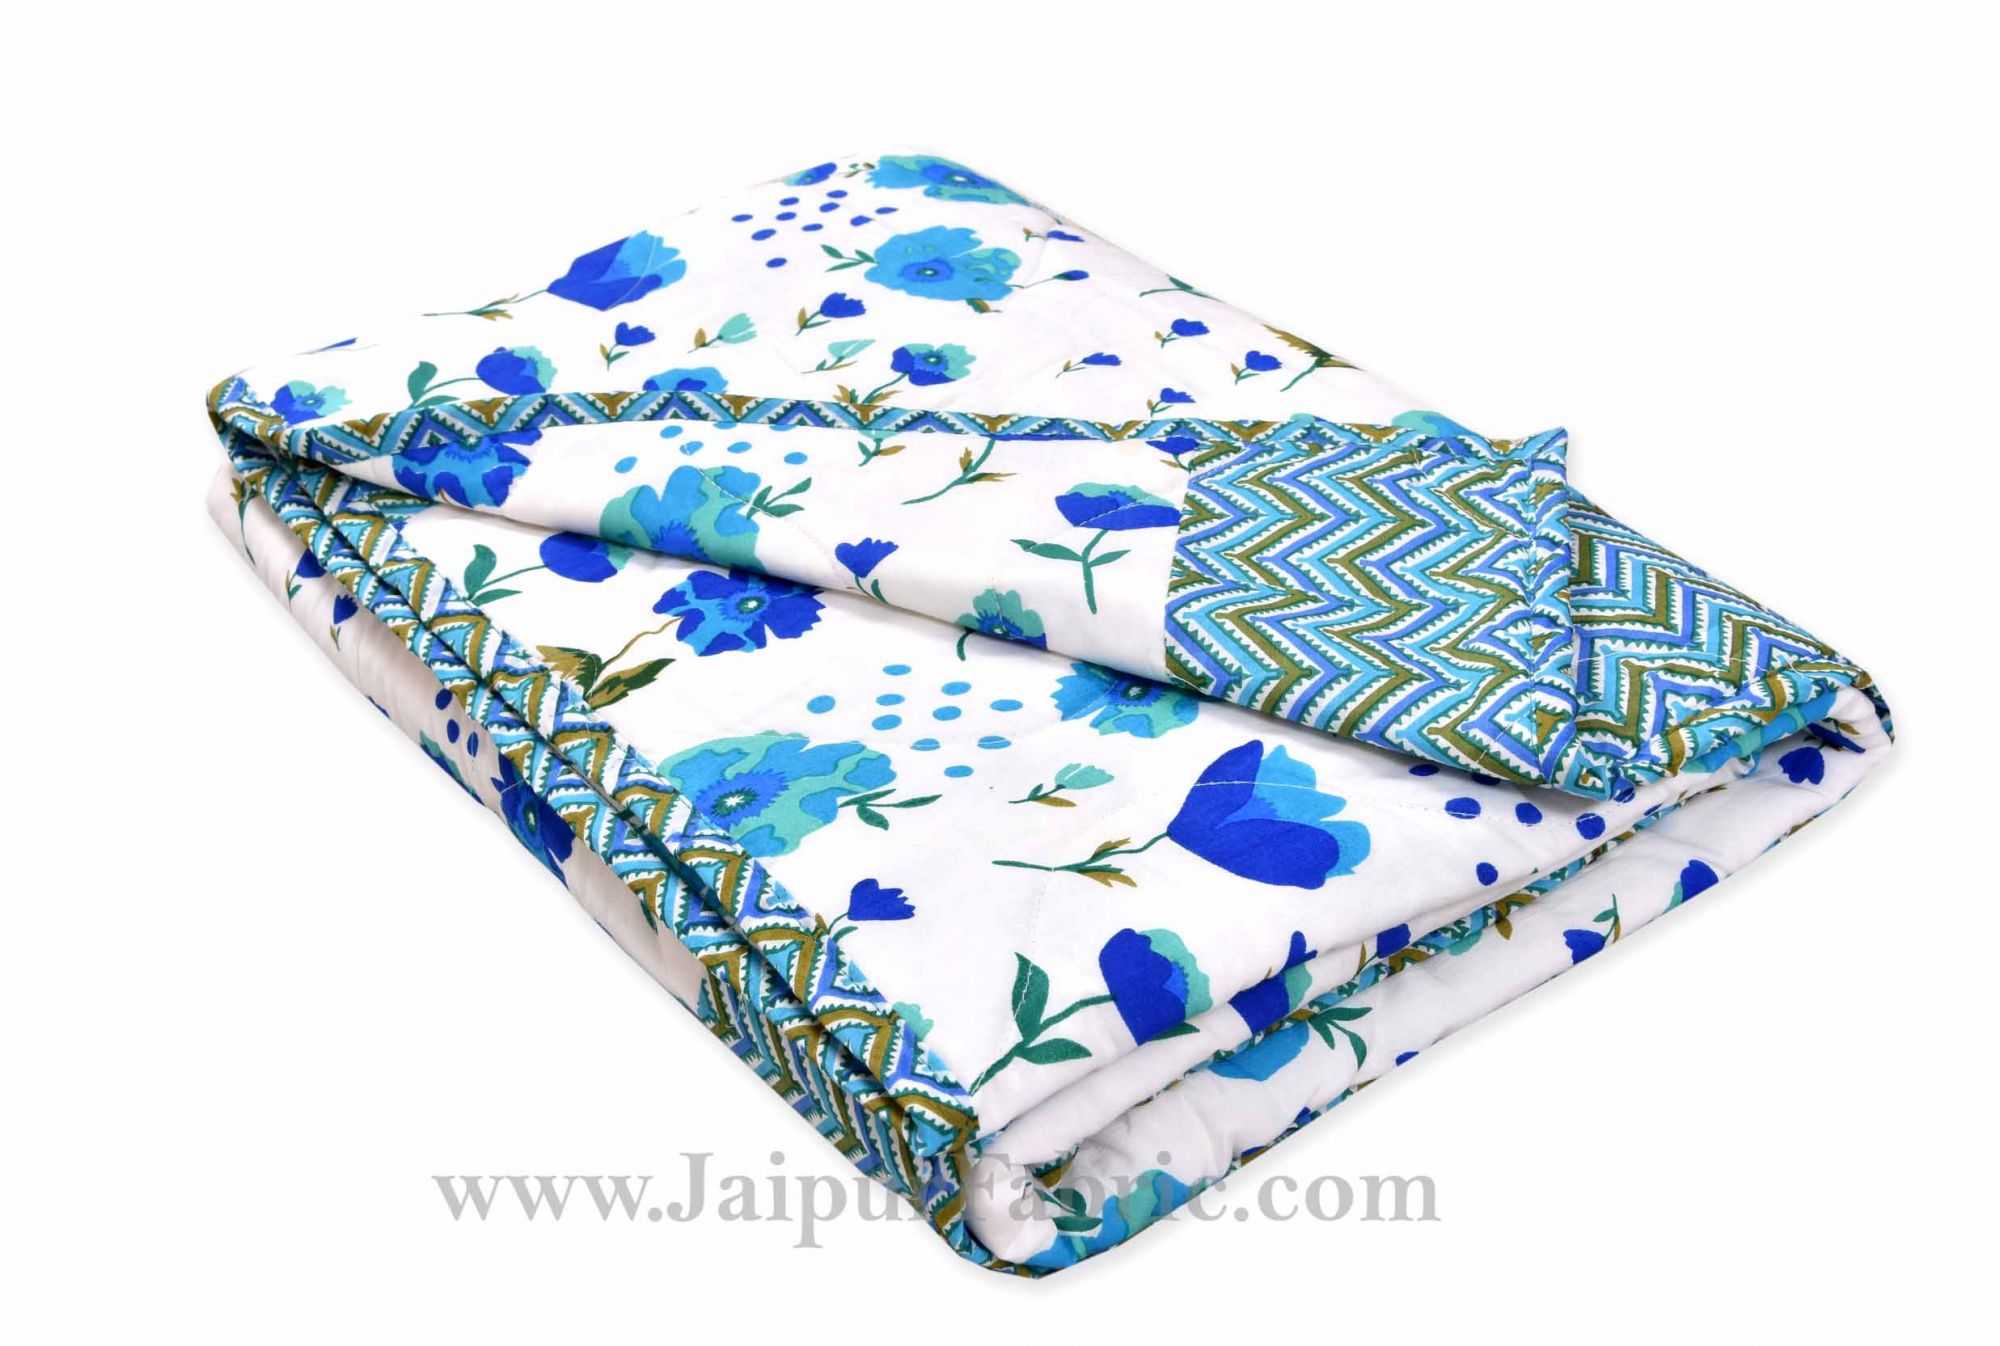 Baby Blanket New Born Blue & White Crib Comforter Toddler Baby Quilt Soft Cute Kids Quilt 120 x 120 cm Multi color